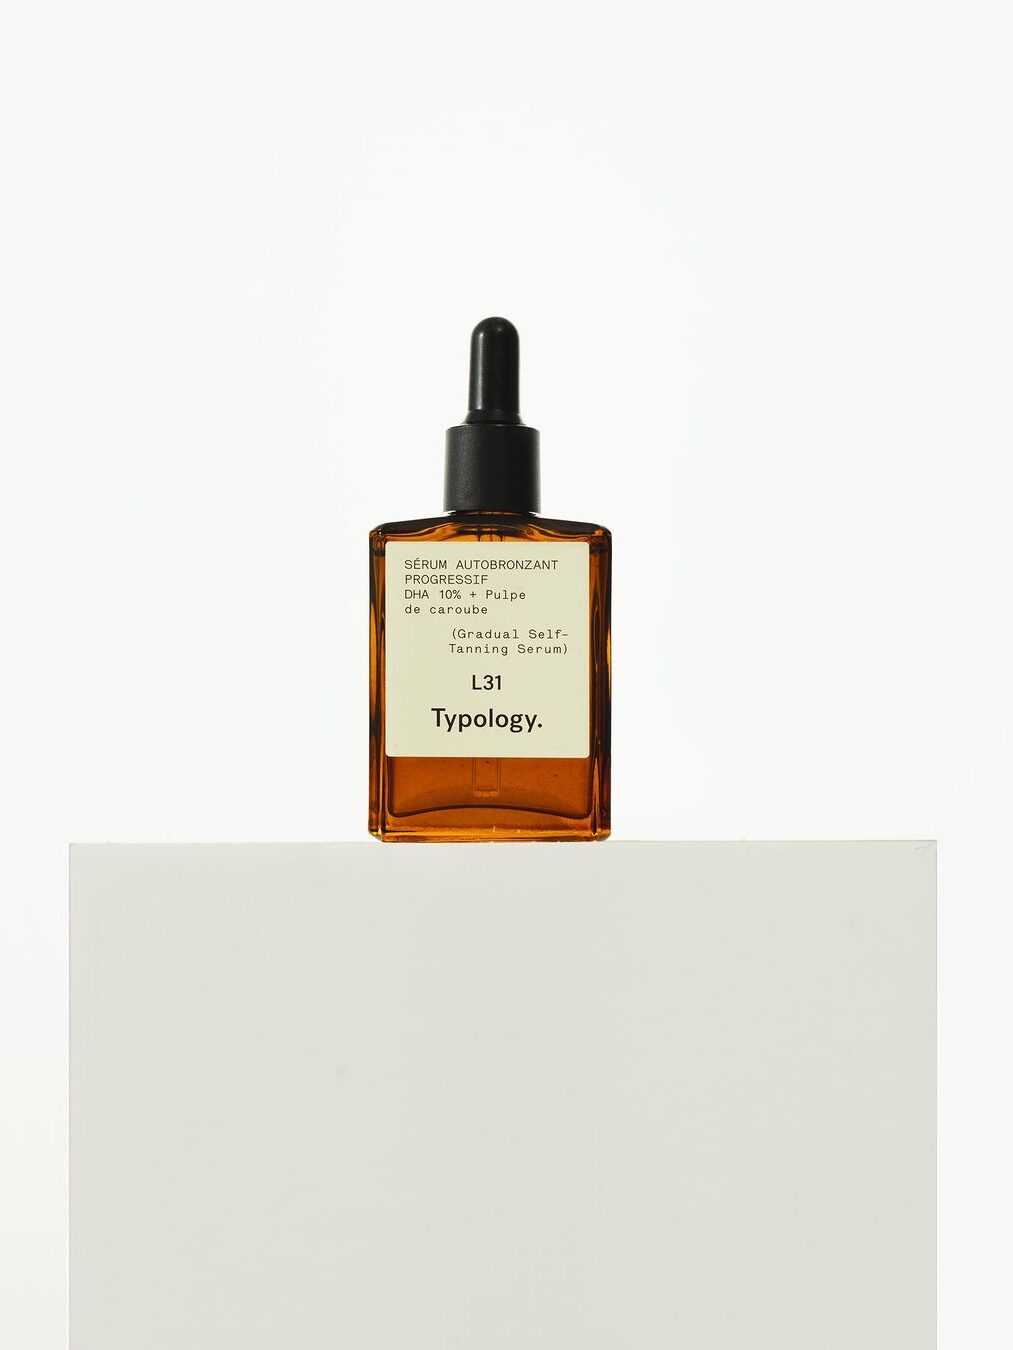 A bottle of Typology Lait Self-Tanning Serum is placed on a white surface against a plain white background.